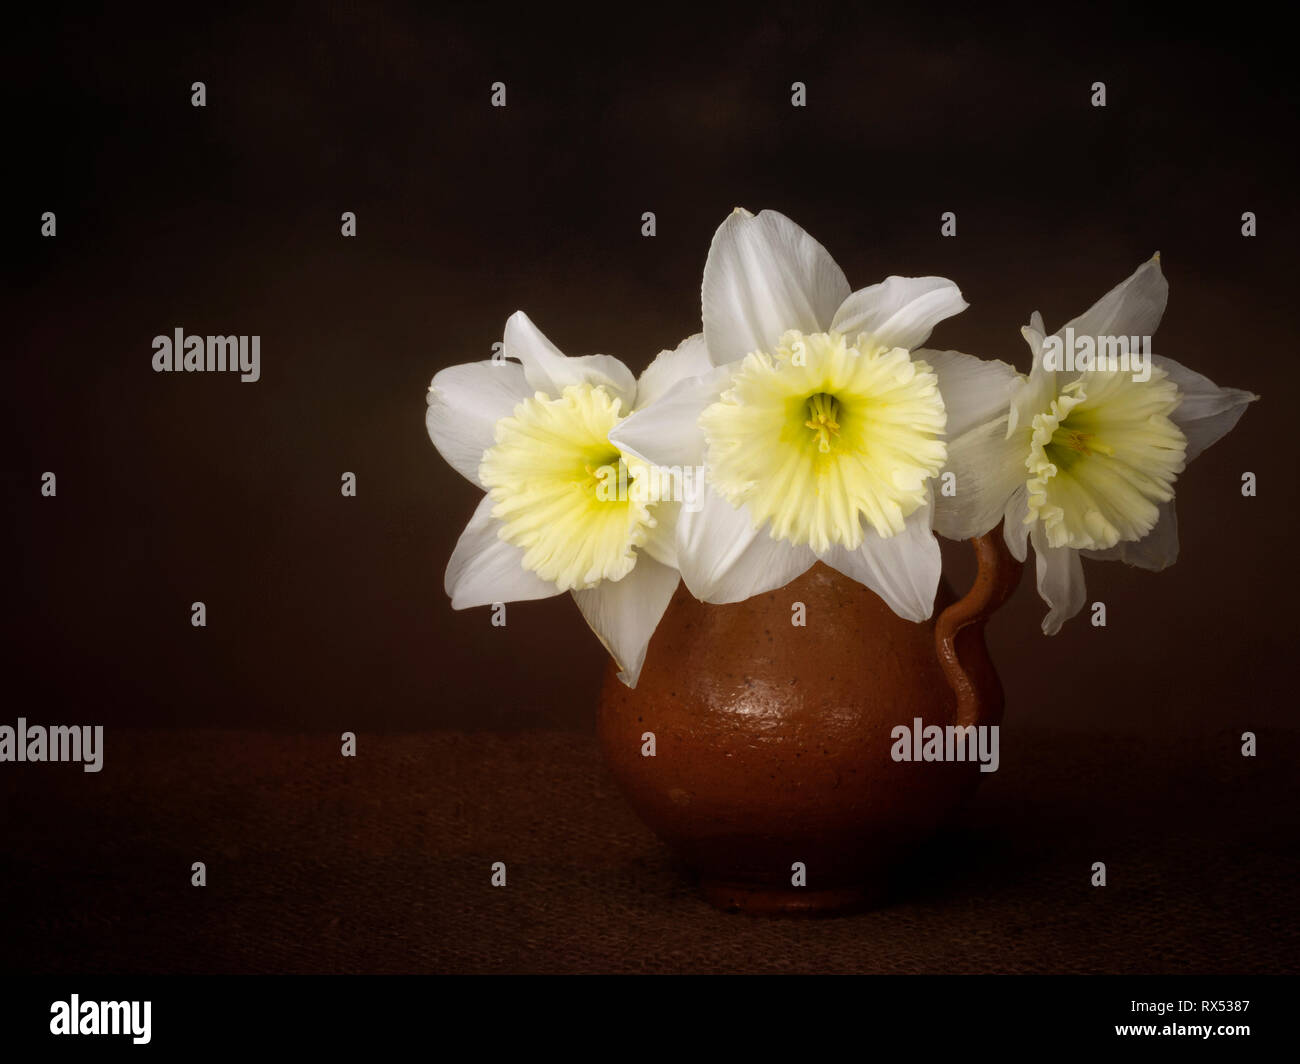 Vintage style still life of pale and beautiful daffodil, narcissus flowers and jug. Chiariscuro light painting. Stock Photo